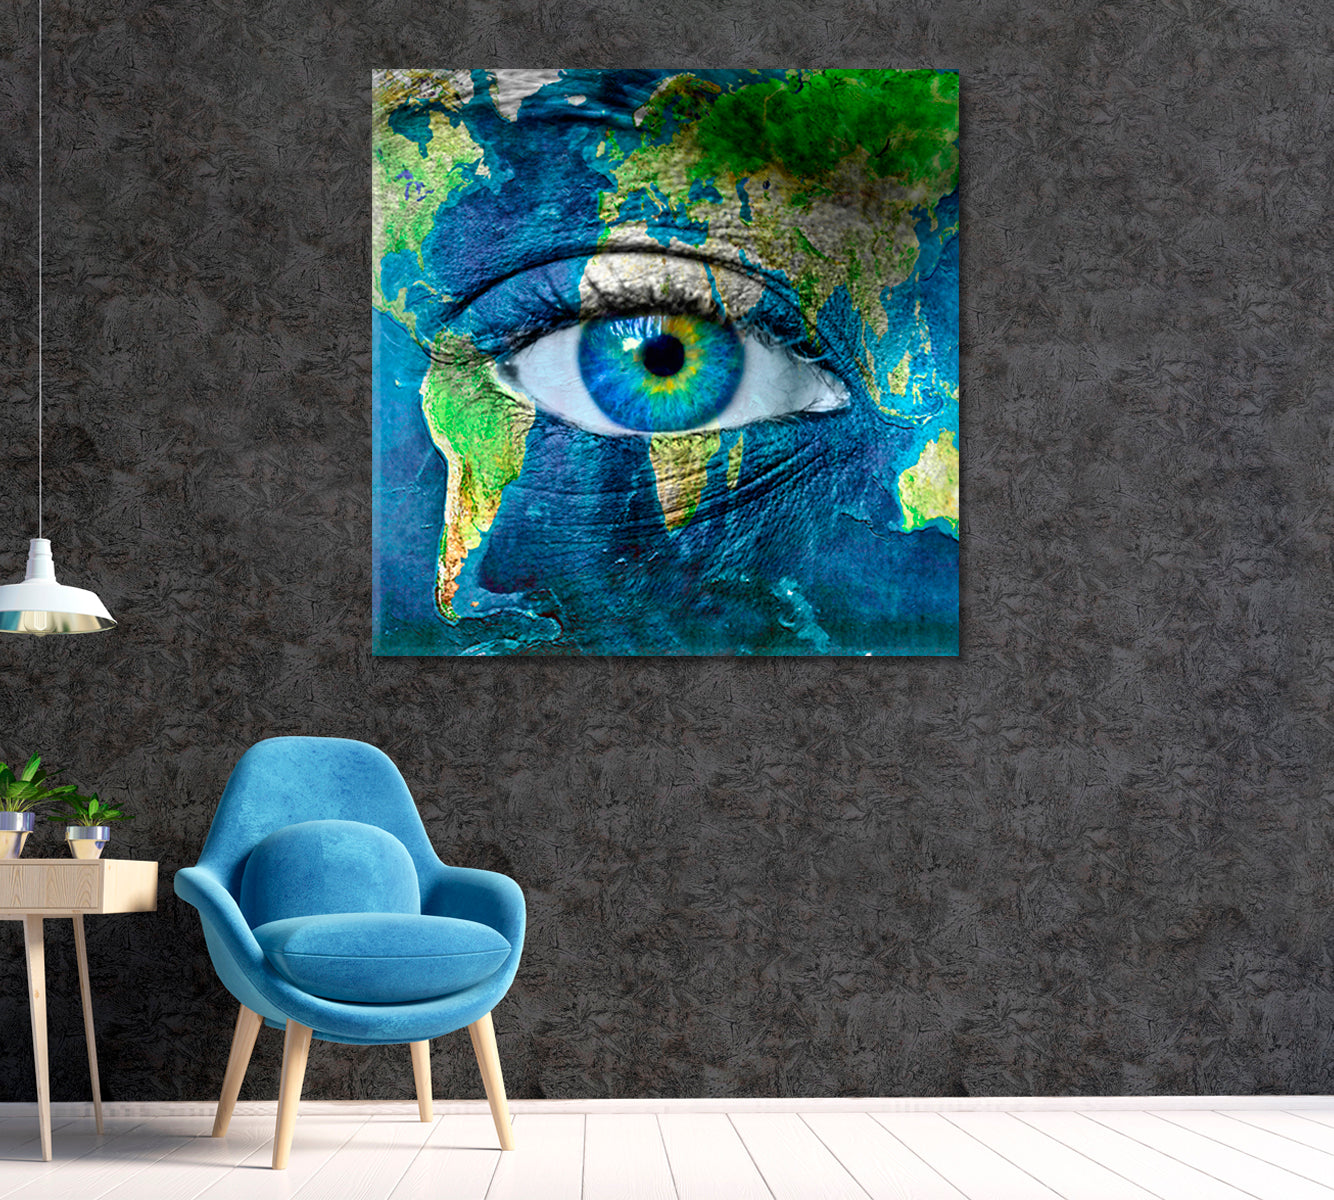 Planet Earth and Human Eye Canvas Print ArtLexy 1 Panel 12"x12" inches 